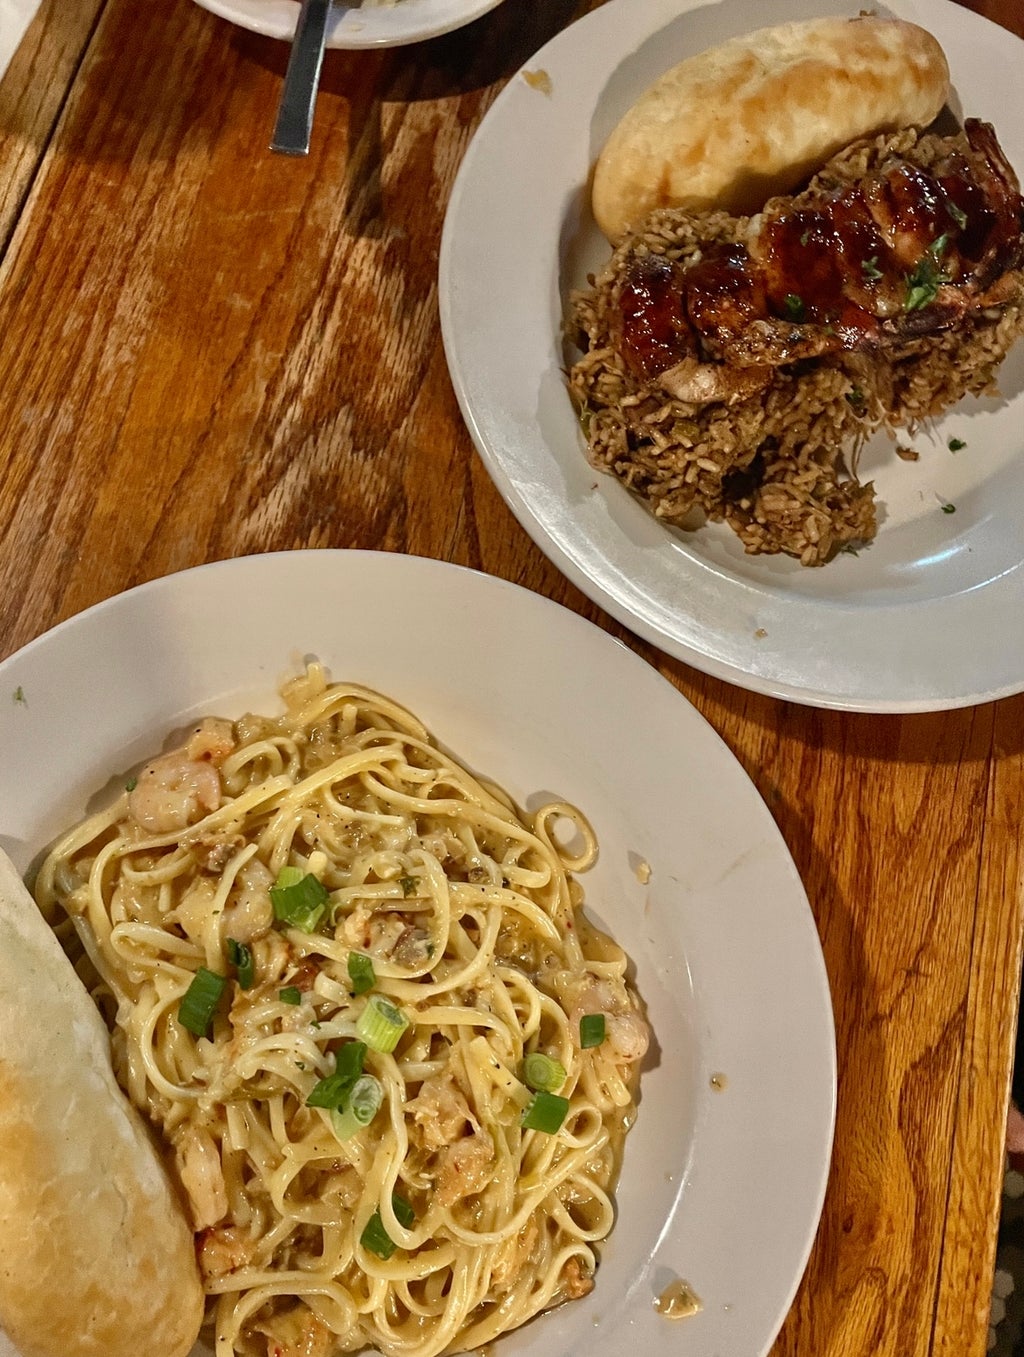 Seafood Pasta and Bacon Wrapped BBQ Shrimp & Jambalaya from The Chimes.